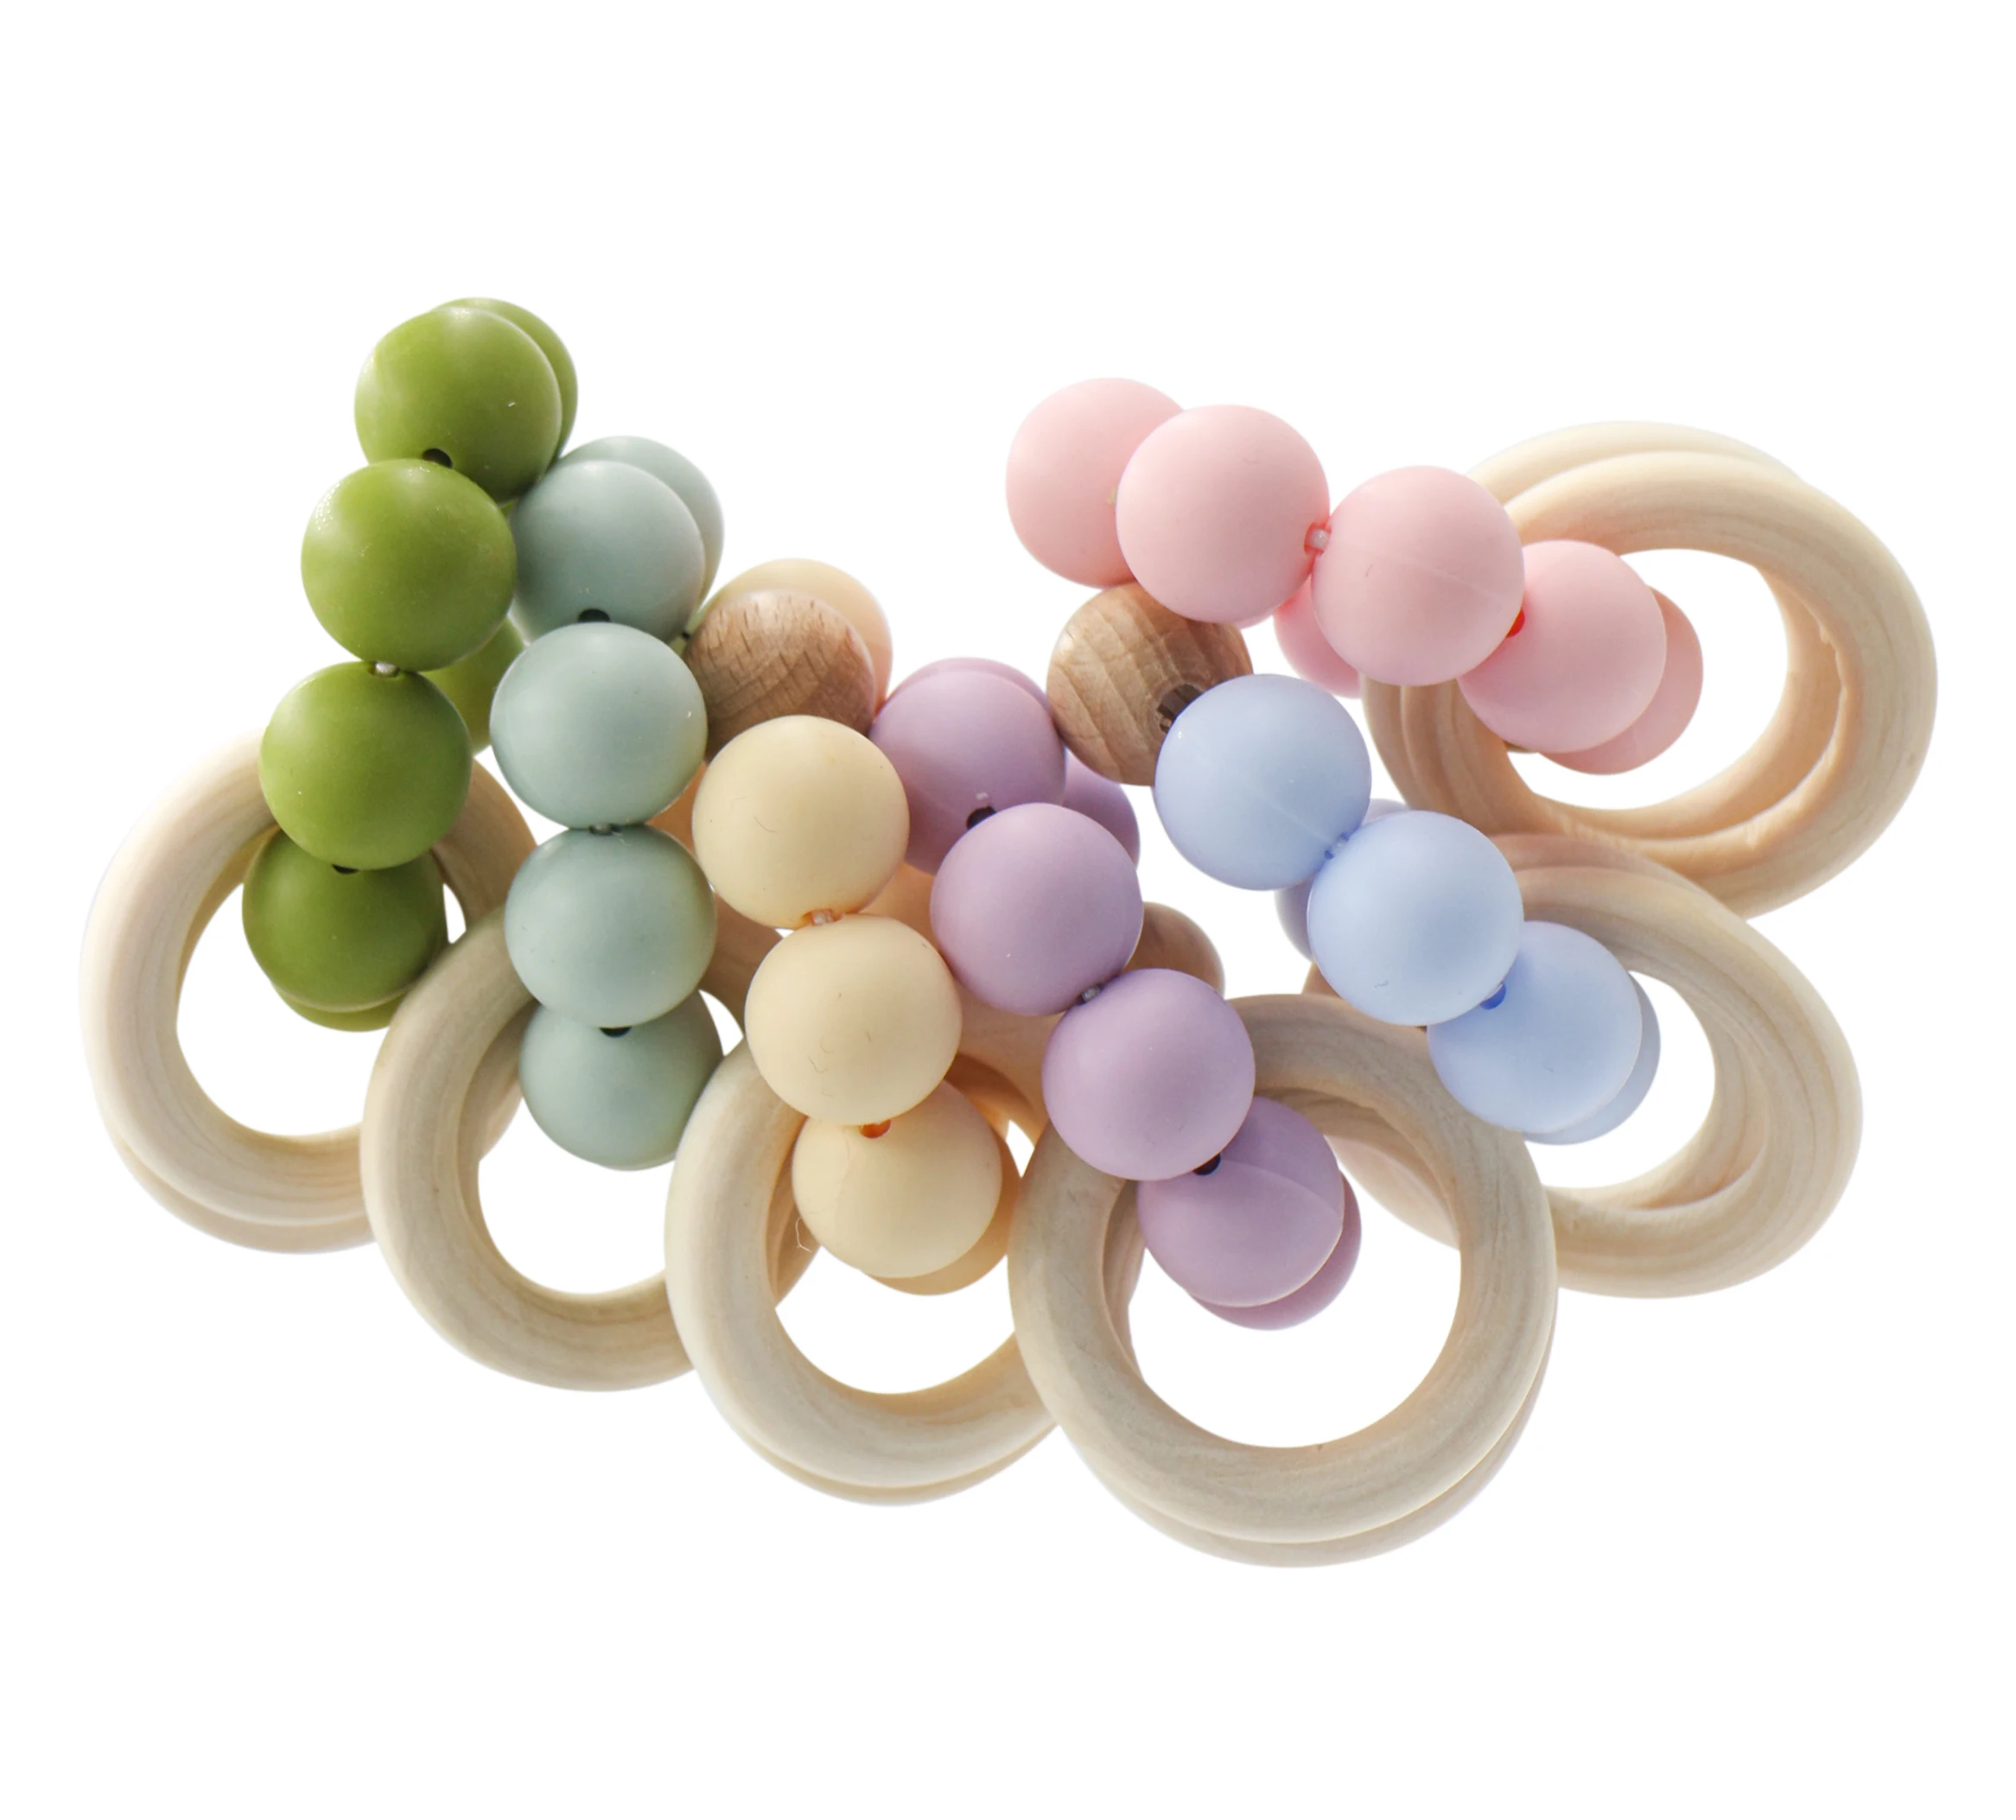 

Wooden Silicone Baby Teether Bracelet Toy Wooden Ring Toy Silicone Baby Teether For Baby Teething Molar